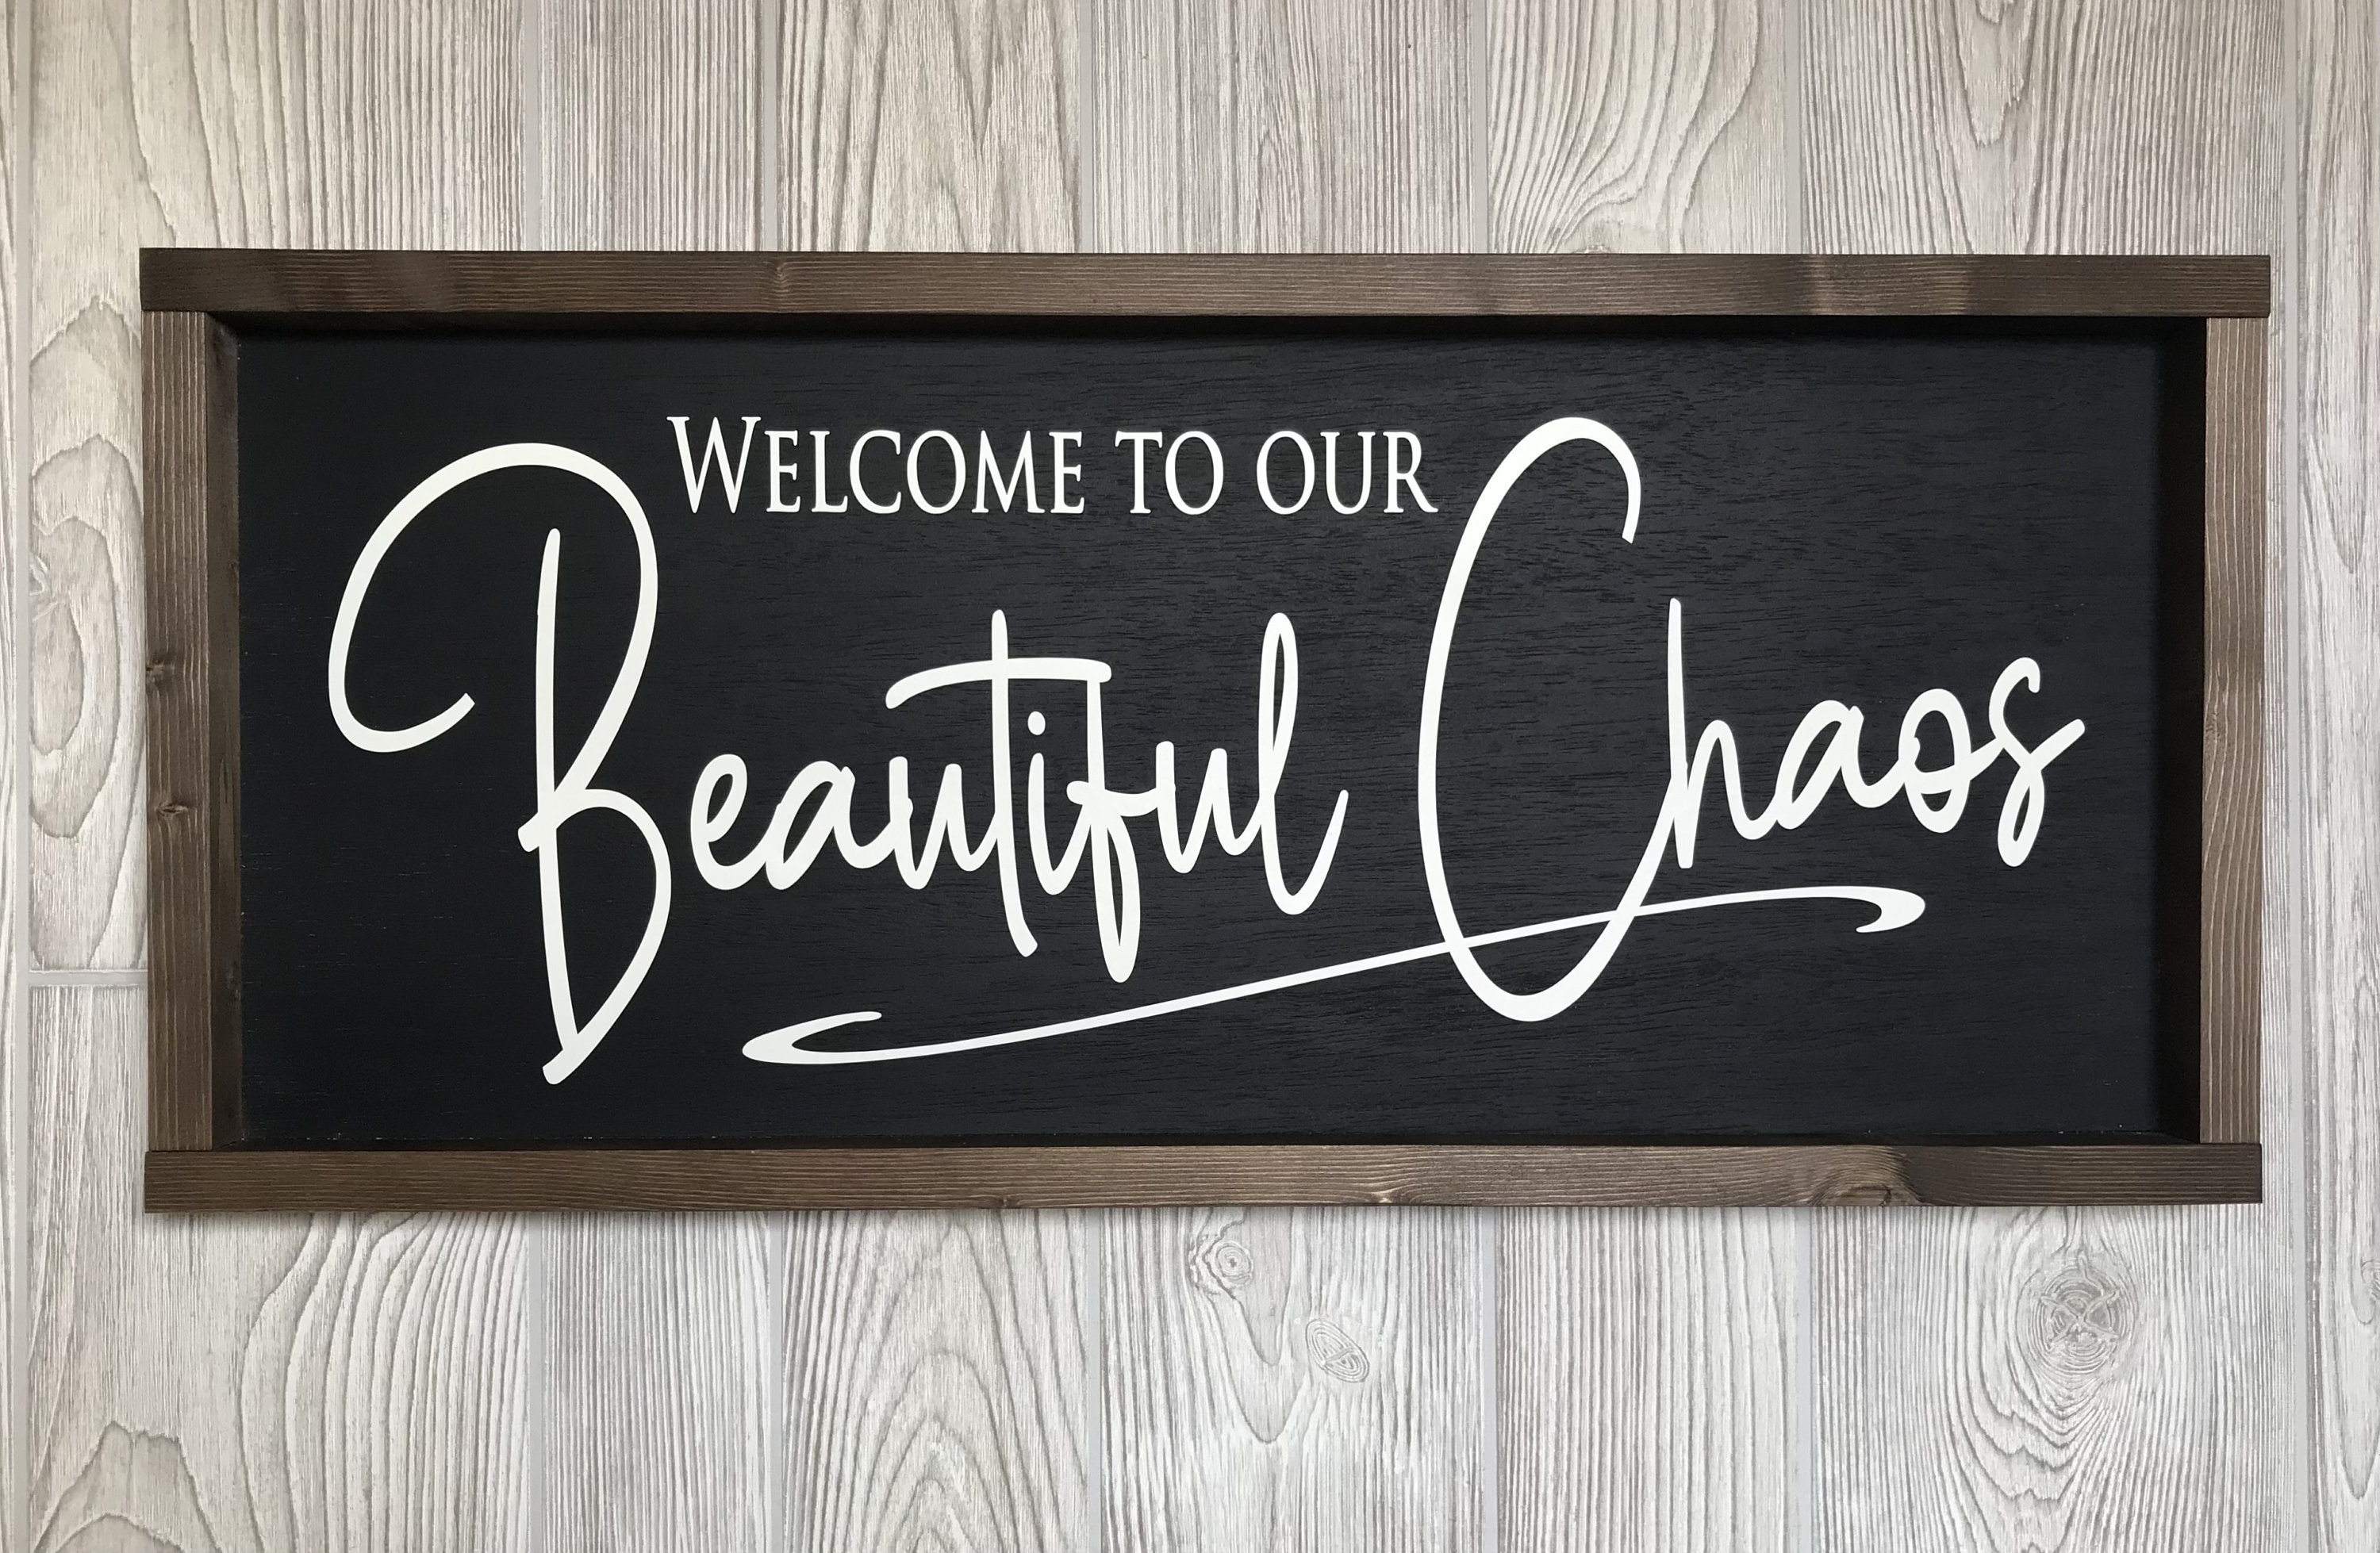 Welcome to our beautiful Chaos Framed in Mango Wood Hanging Sign Plaque Retreat 